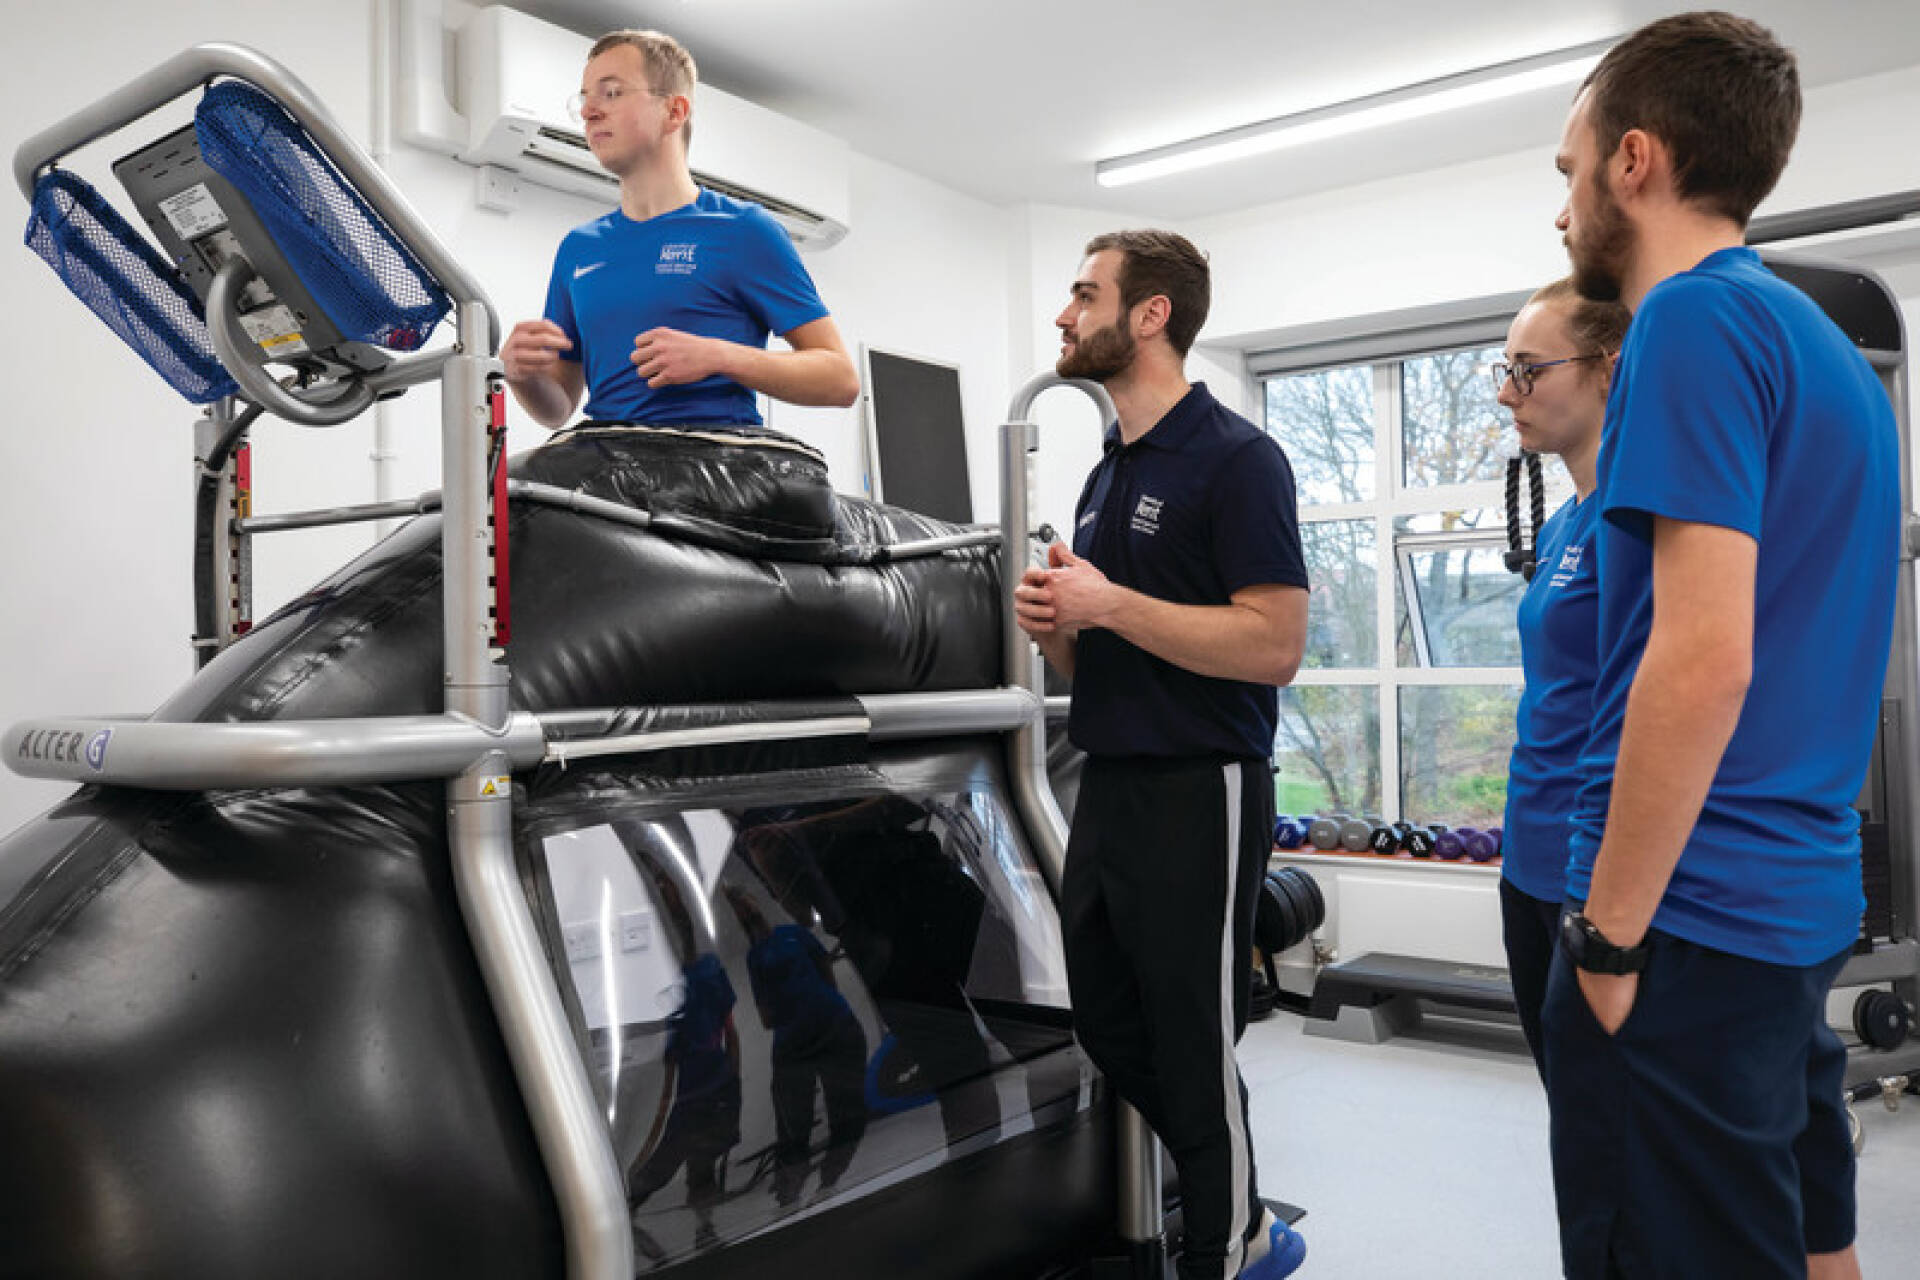 Students in the labs at Kent using the antigravity treadmill